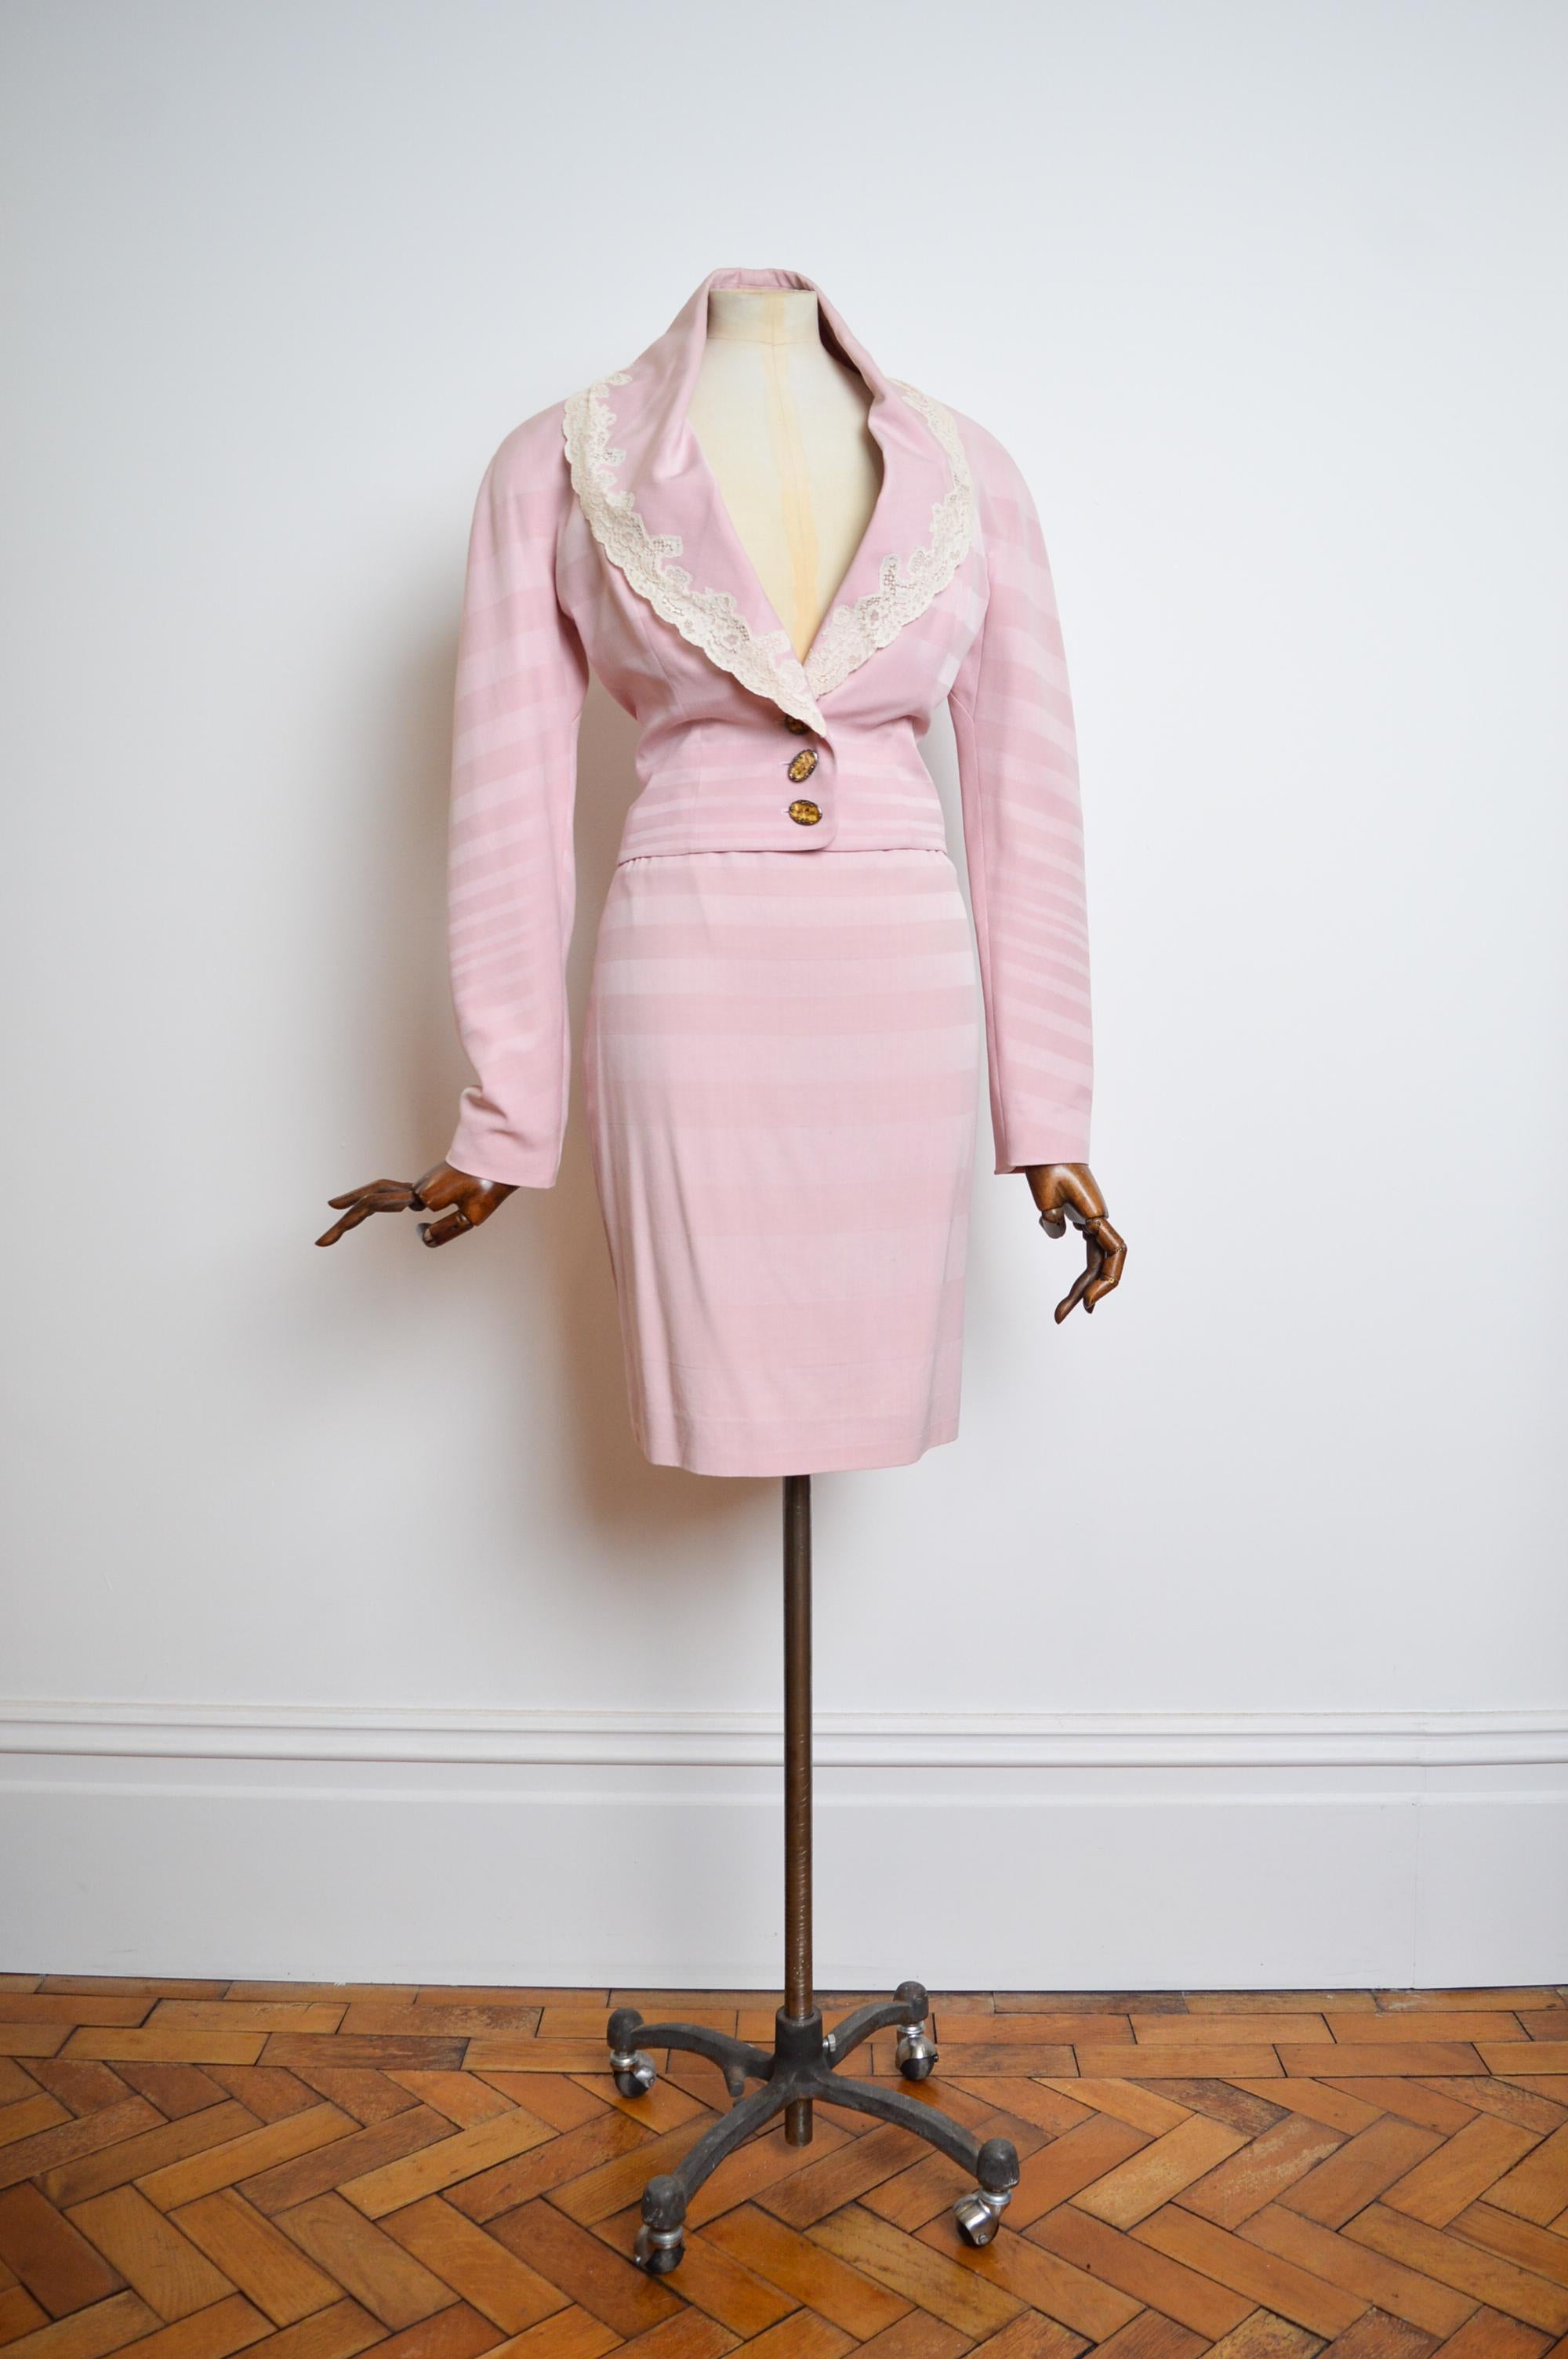 A/W 1999 Christian Dior by John Galliano Pink Lace Jacket & Pencil Skirt set 1